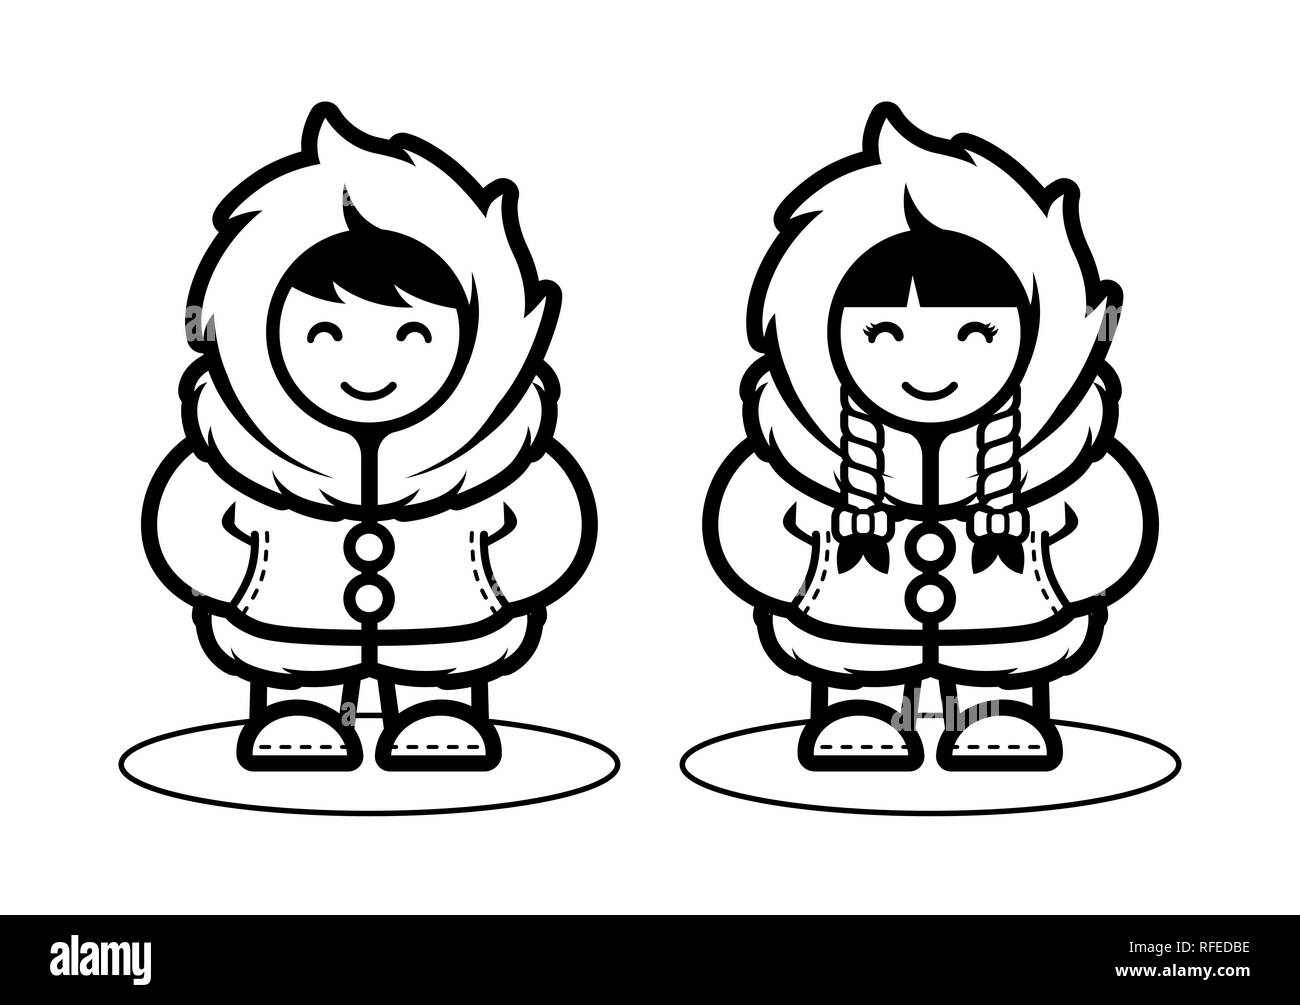 Young eskimo cute couple illustration in cartoon style for children kids coloring book arctic people living in north pole flat design stock vector image art